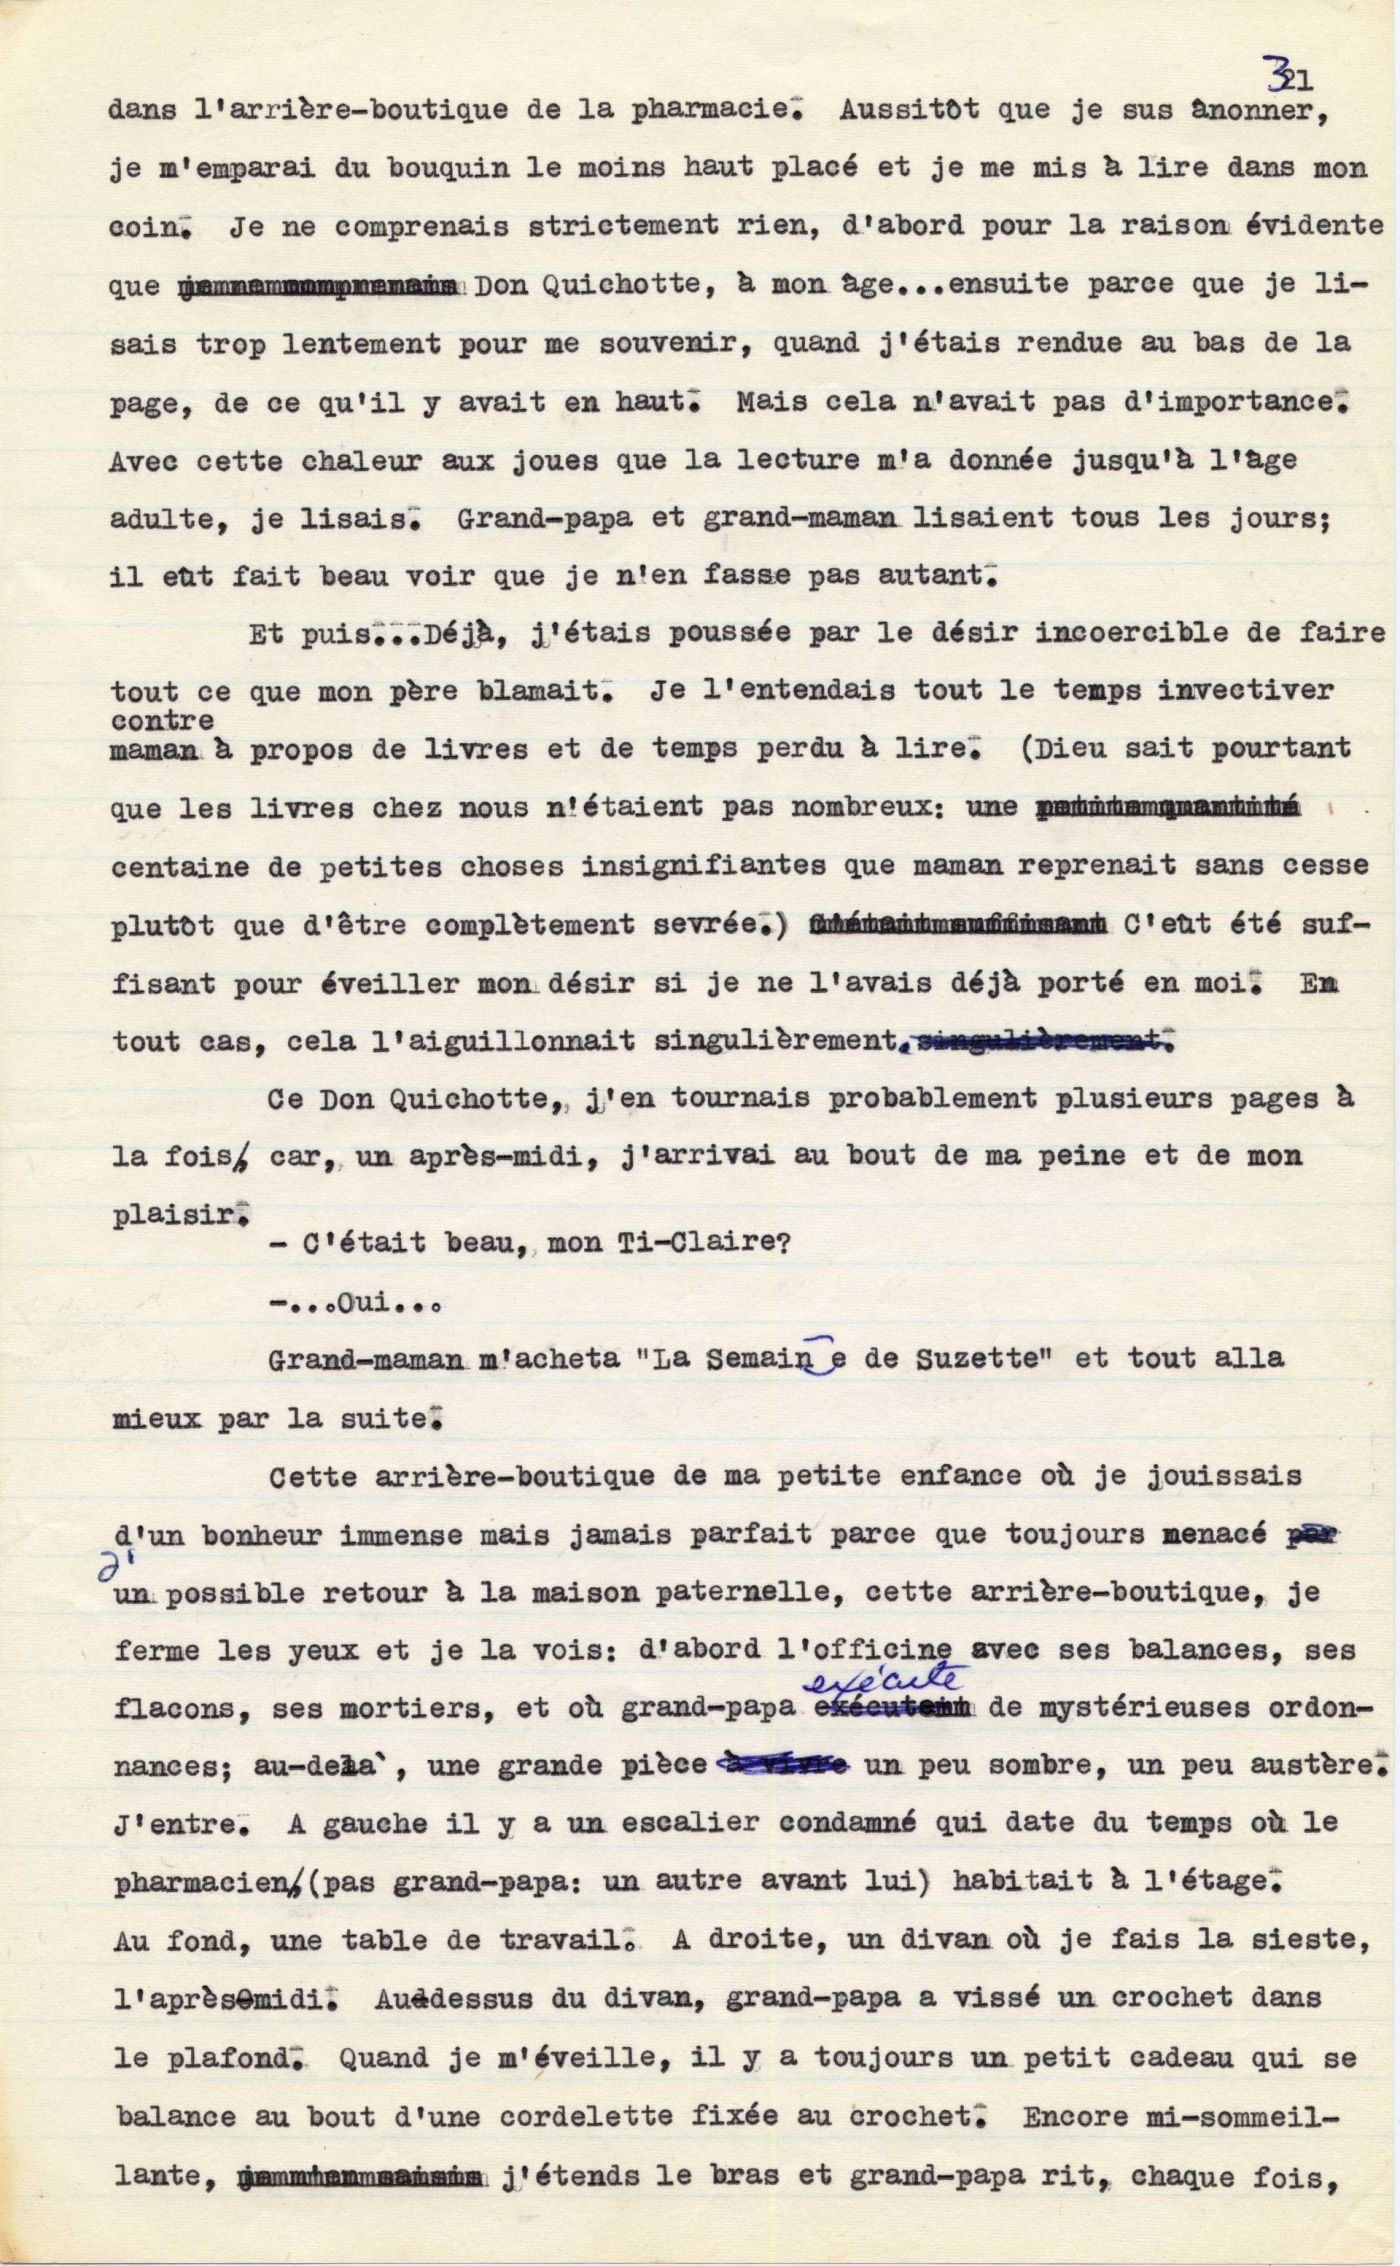 Manuscript typed in French, with handwritten corrections in blue ink. It includes four paragraphs, as well as a short section of dialogue.